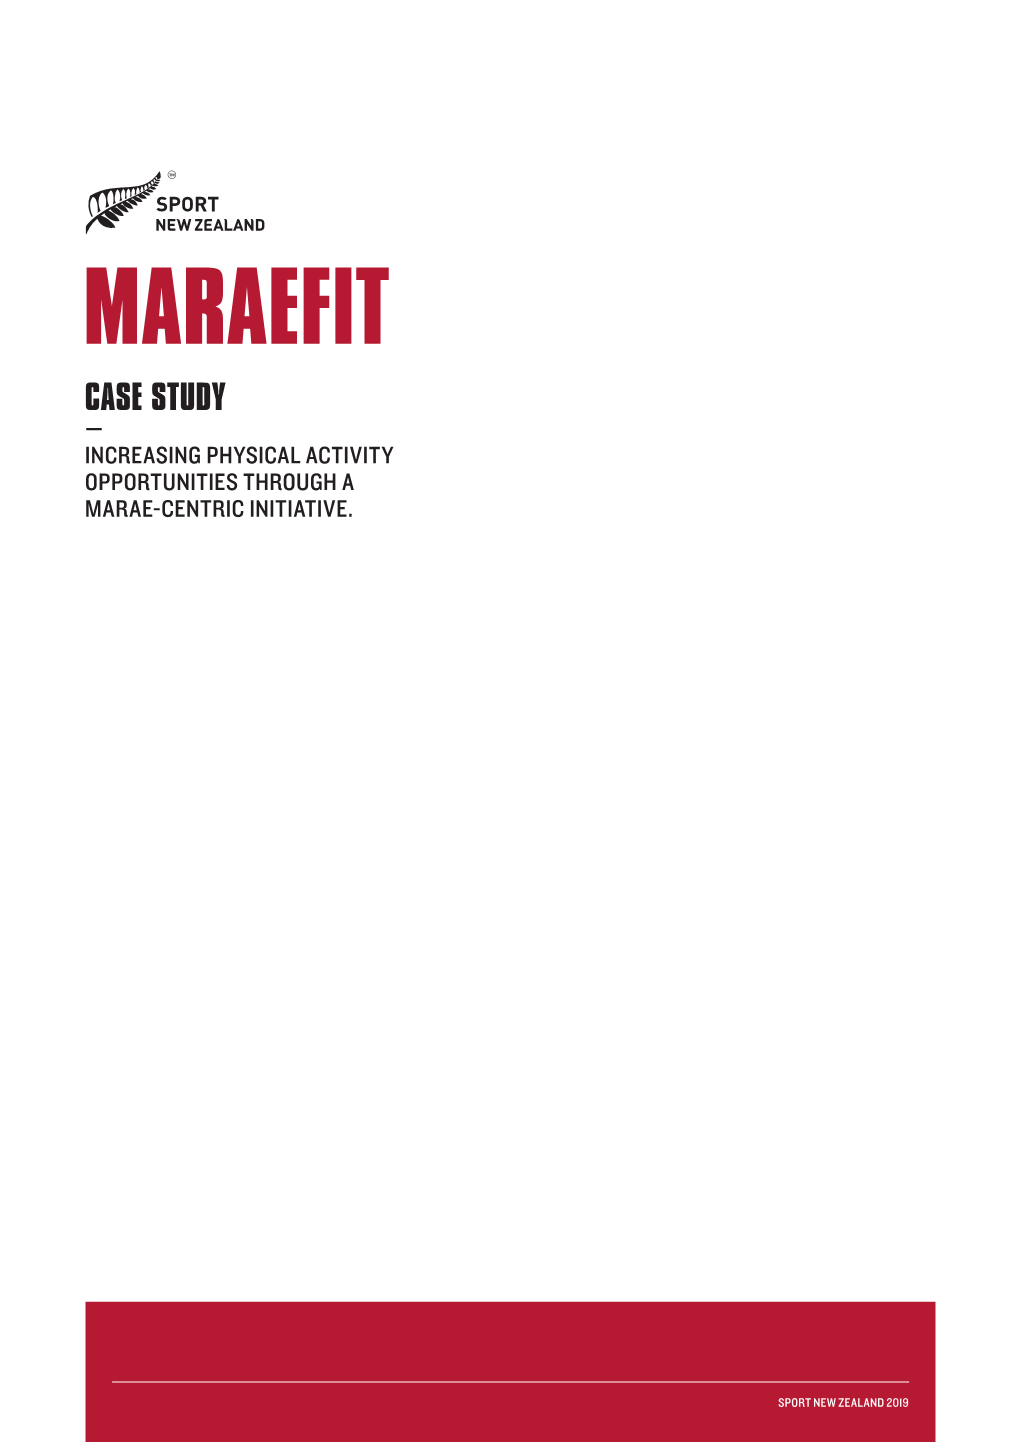 Maraefit Case Study — Increasing Physical Activity Opportunities Through a Marae-Centric Initiative